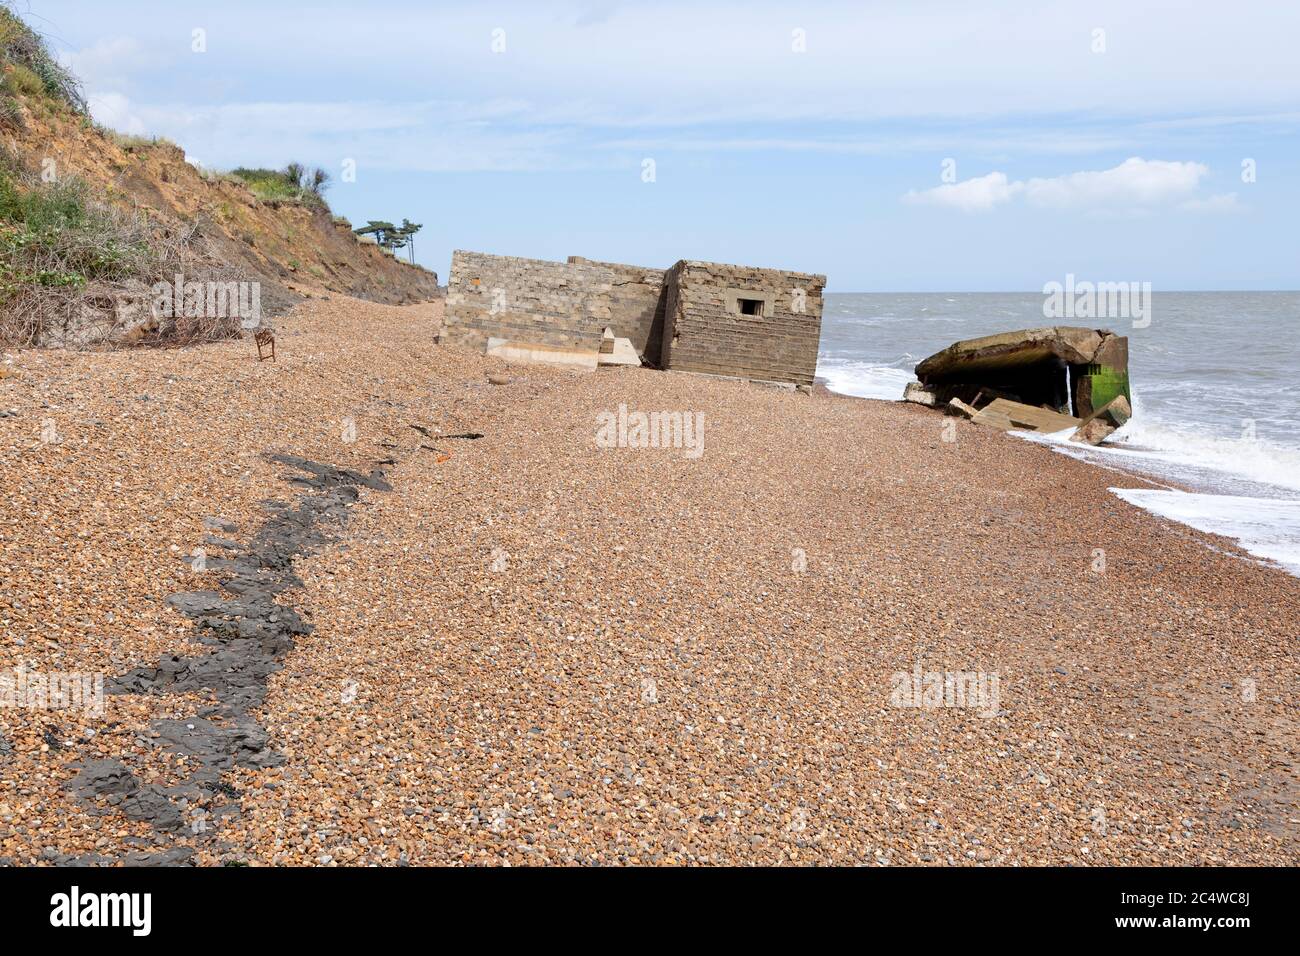 Wartime coastal defences 1940s anti-invasion military structures, Bawdsey, Suffolk, England, UK originally located on cliff top Stock Photo